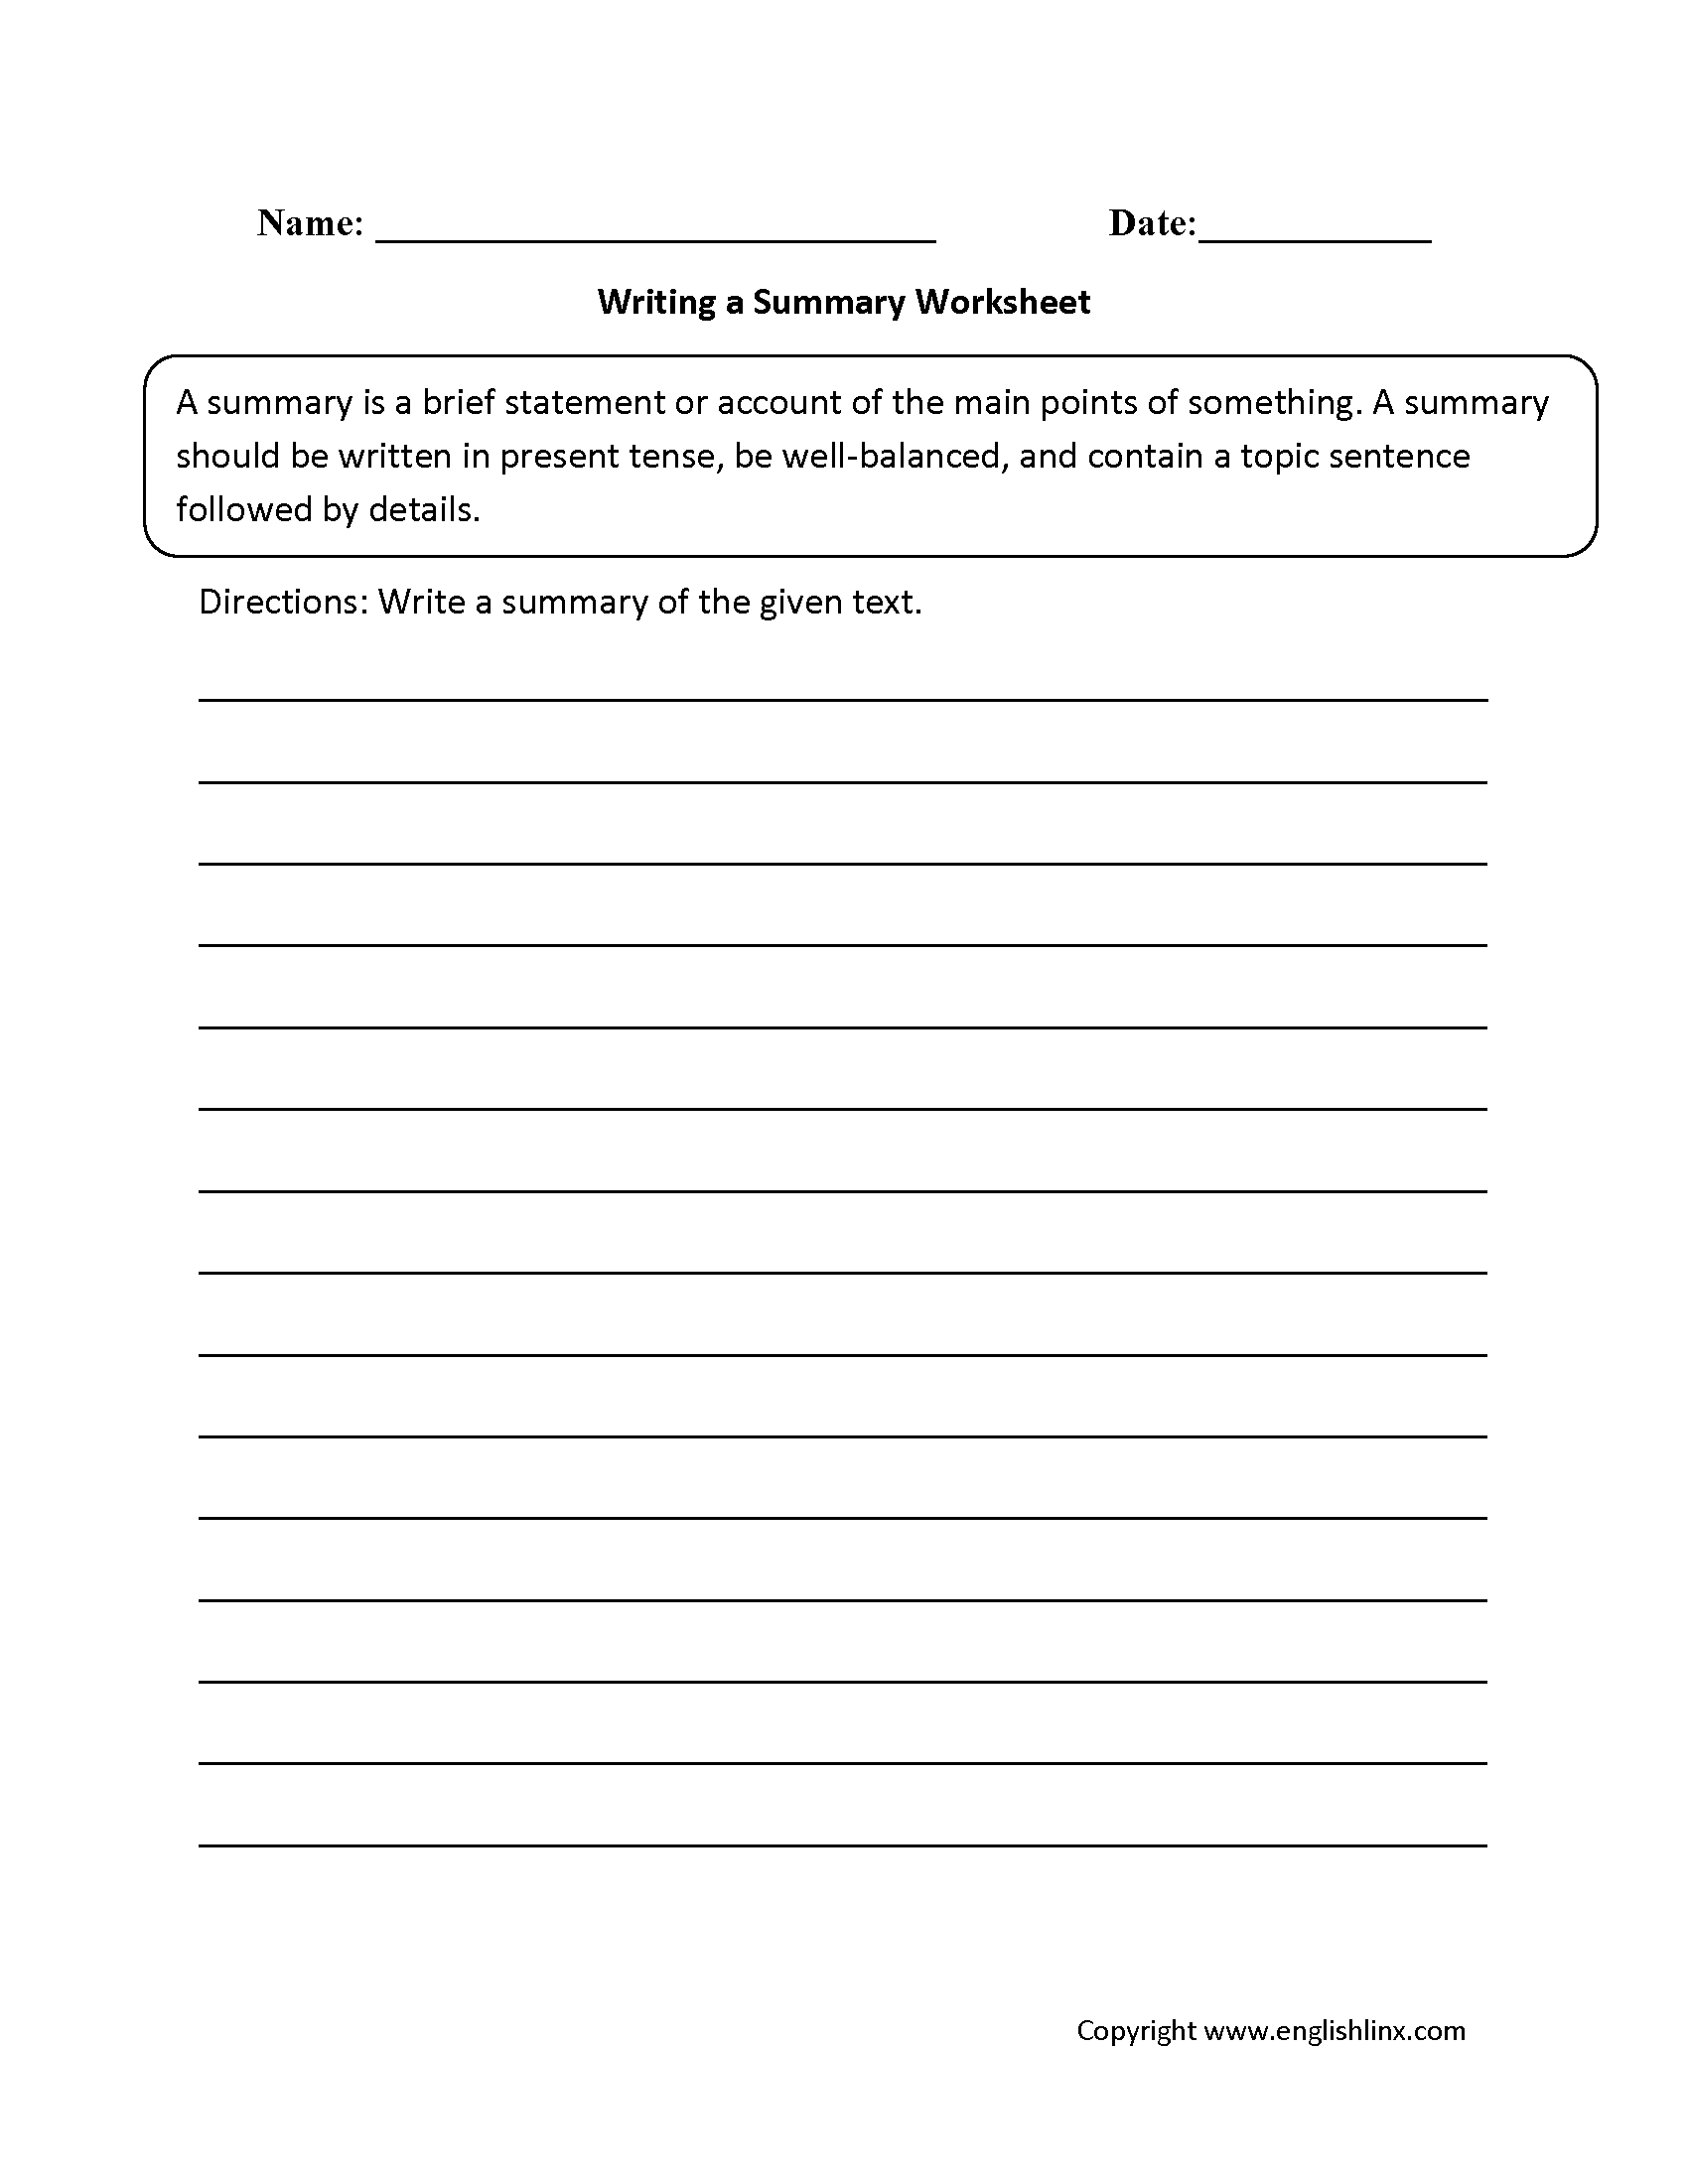 Worksheets on writing a summary